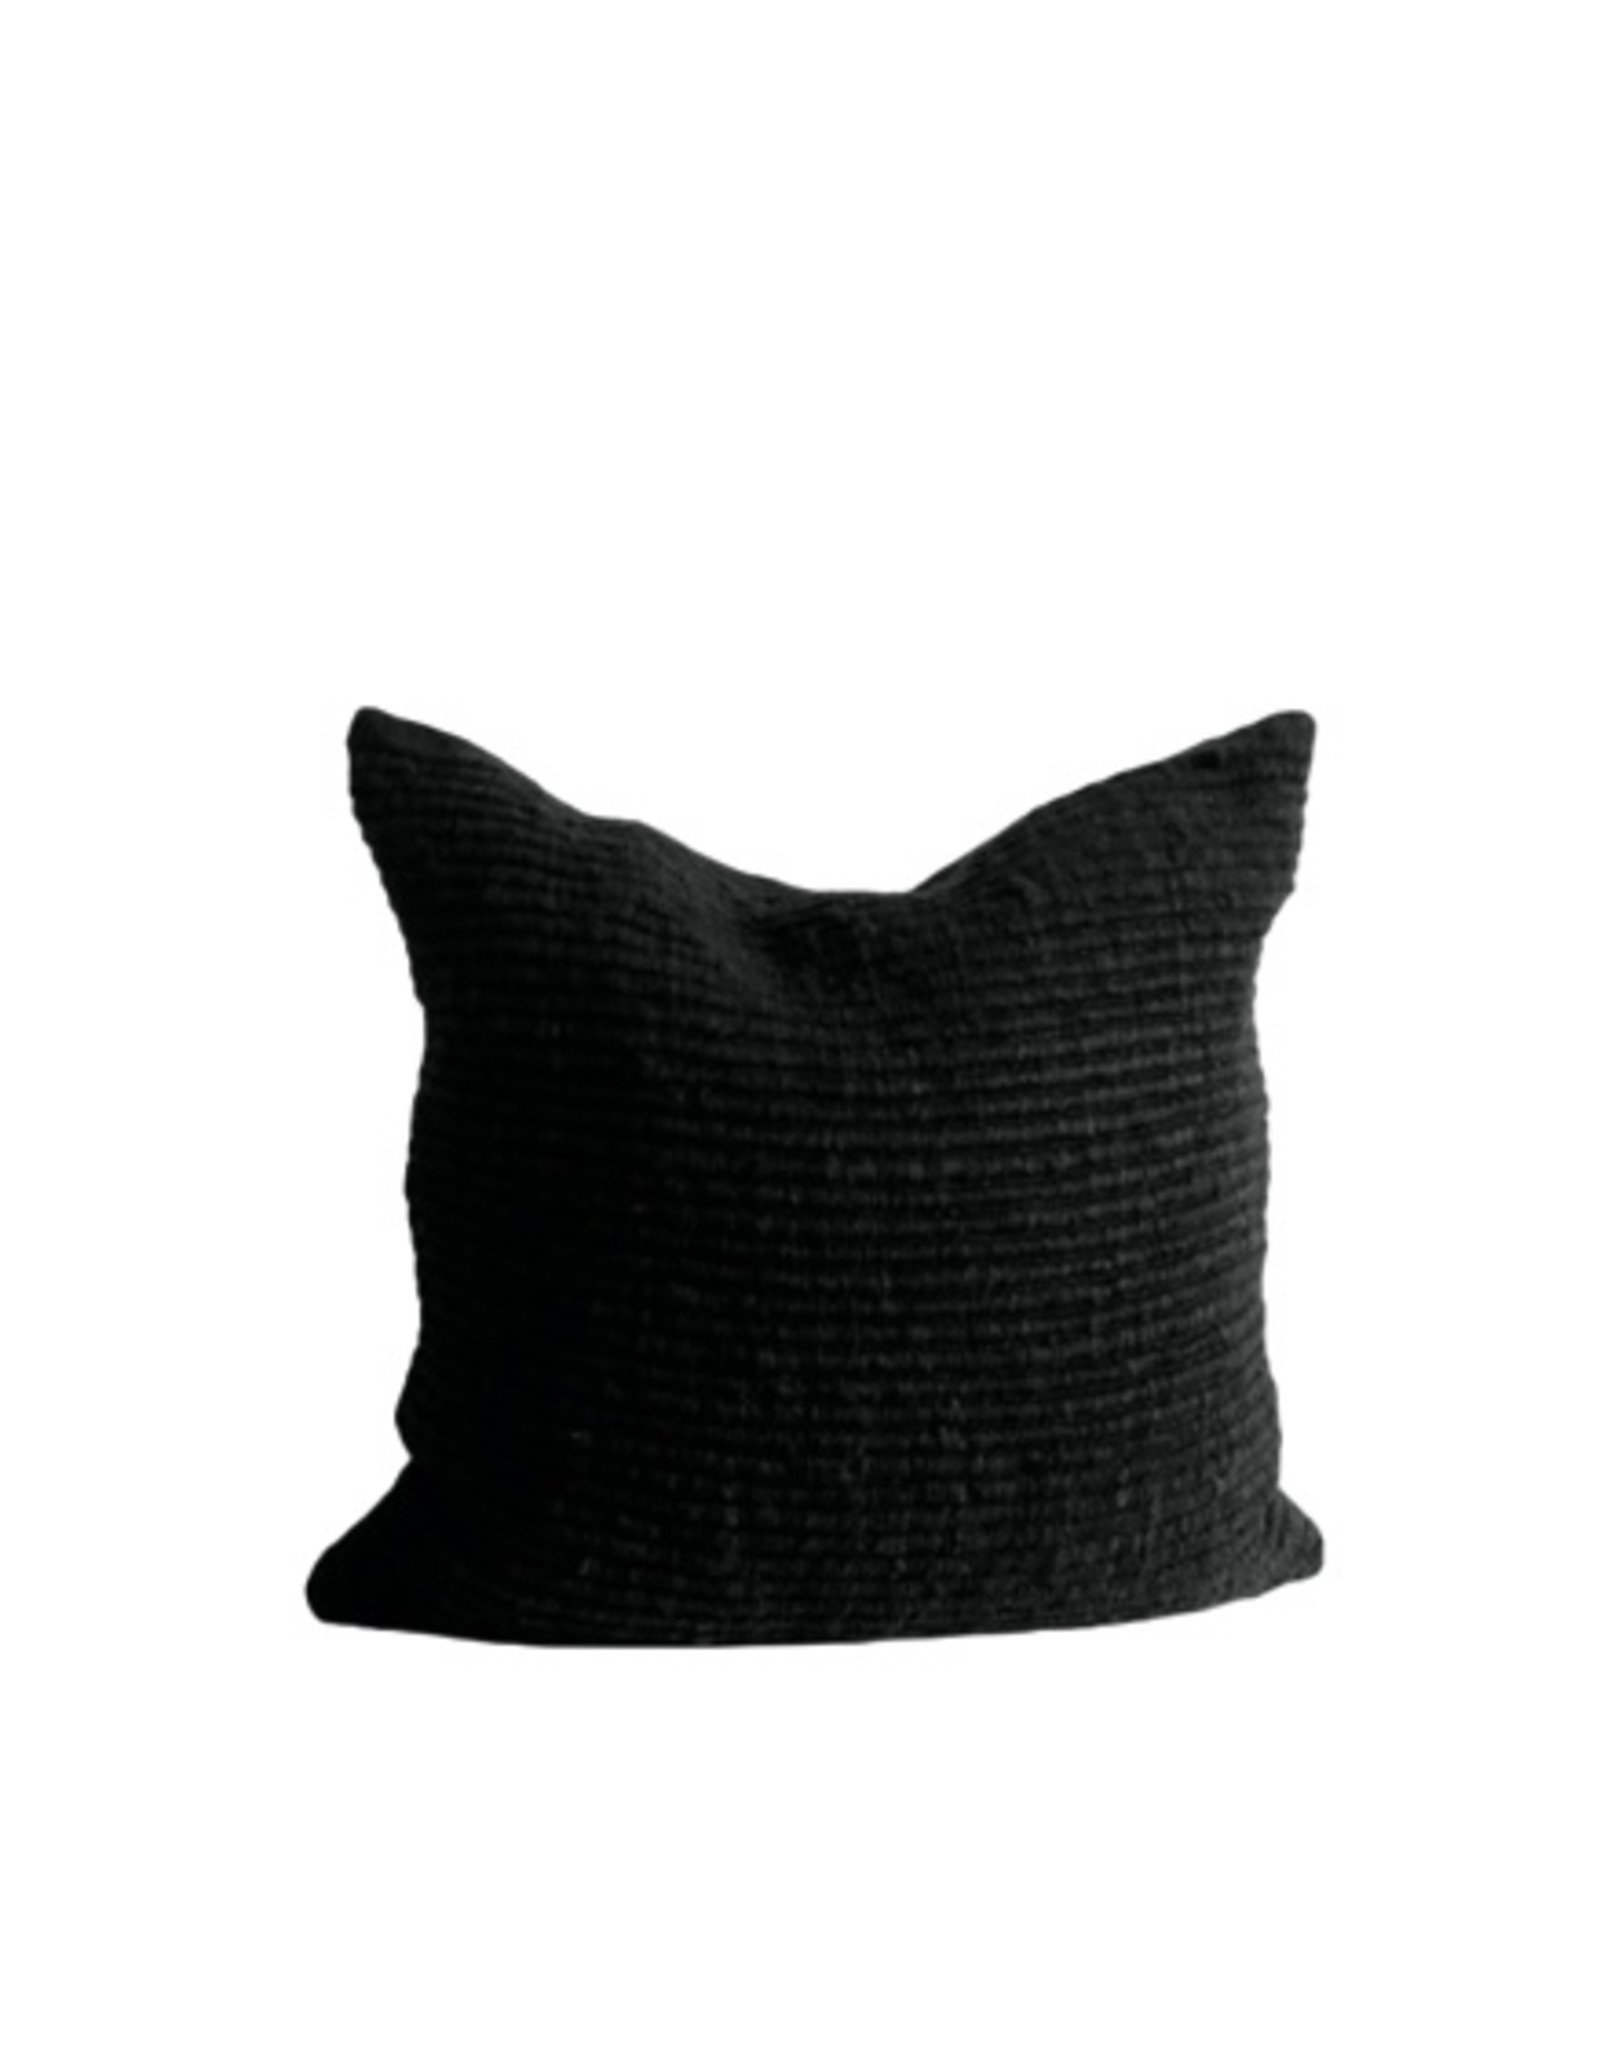 Black Ribbed Textured Pillow, Chile 26x26